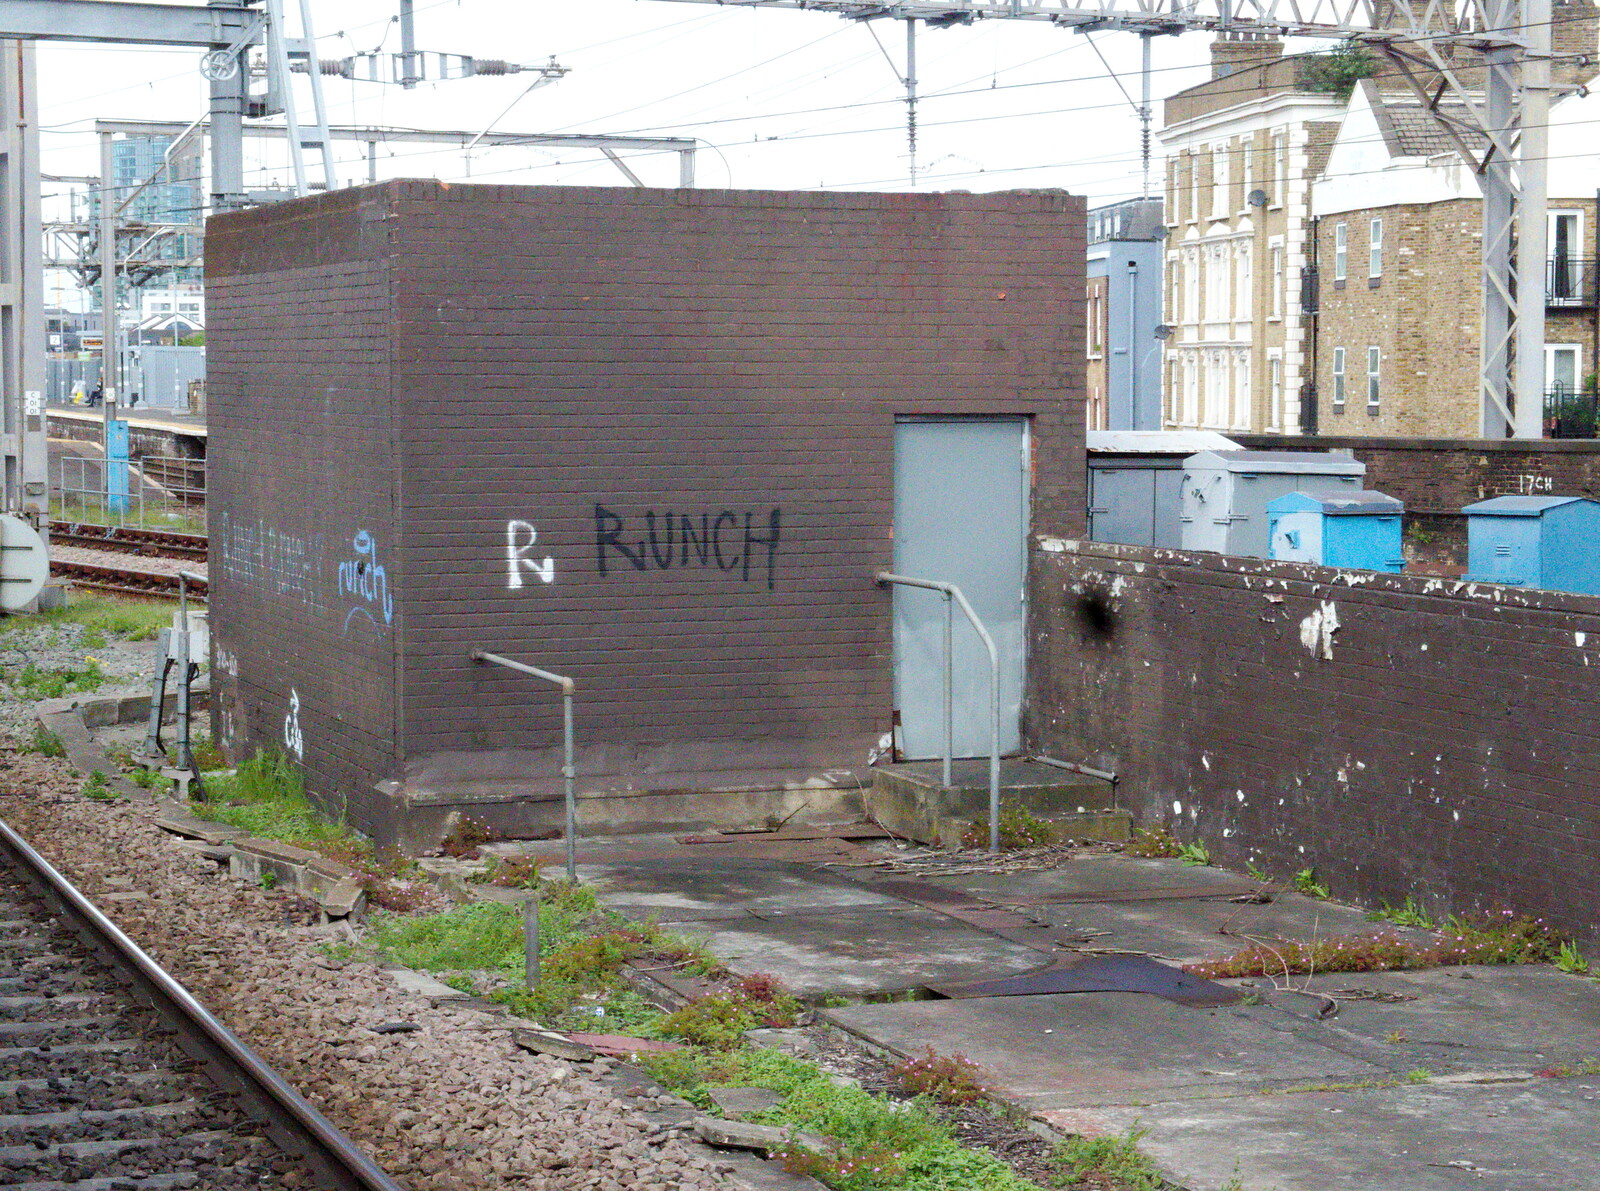 Runch gets some simple tags in from A May Miscellany, London - 8th May 2014